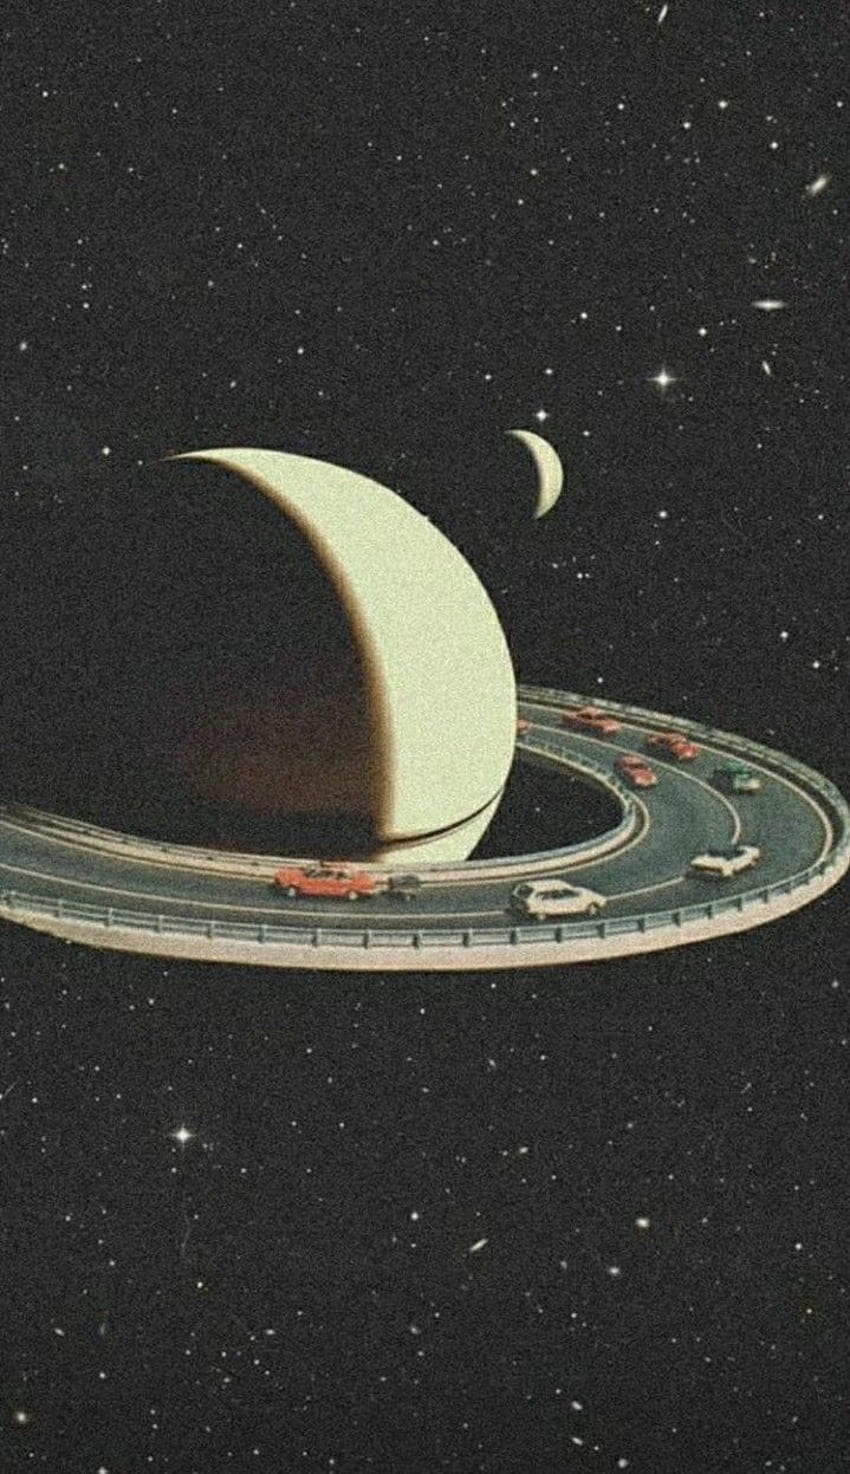 An image of a planet with a road around it - Earth